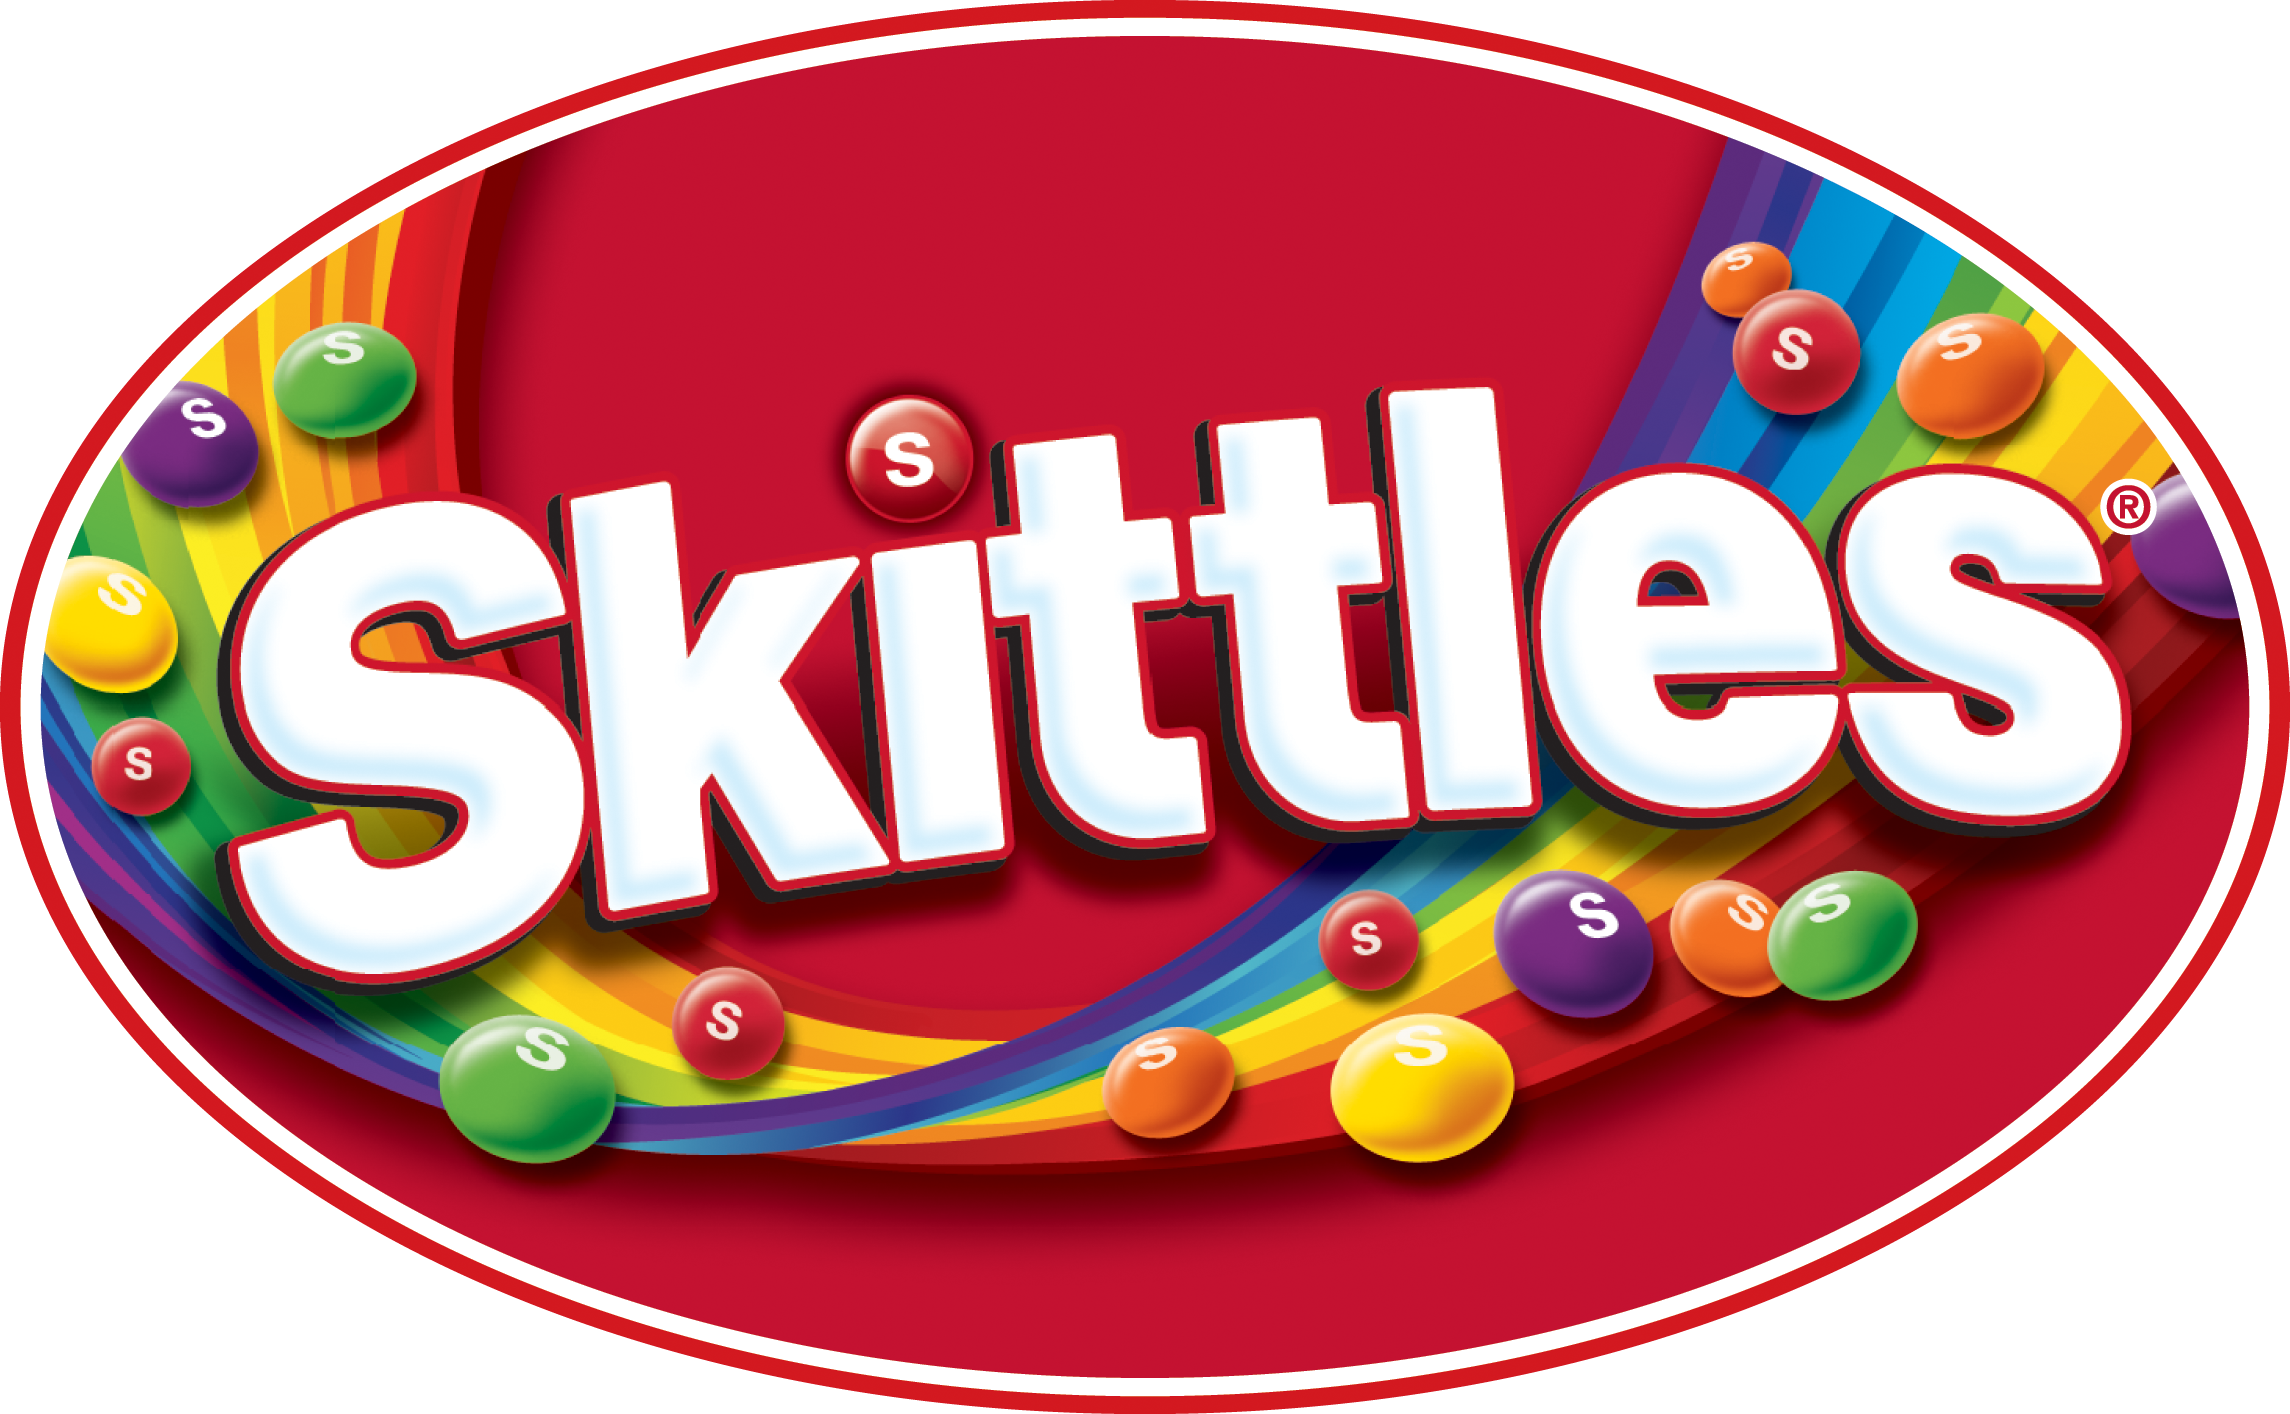 Free Skittles Cliparts, Download Free Skittles Cliparts png images